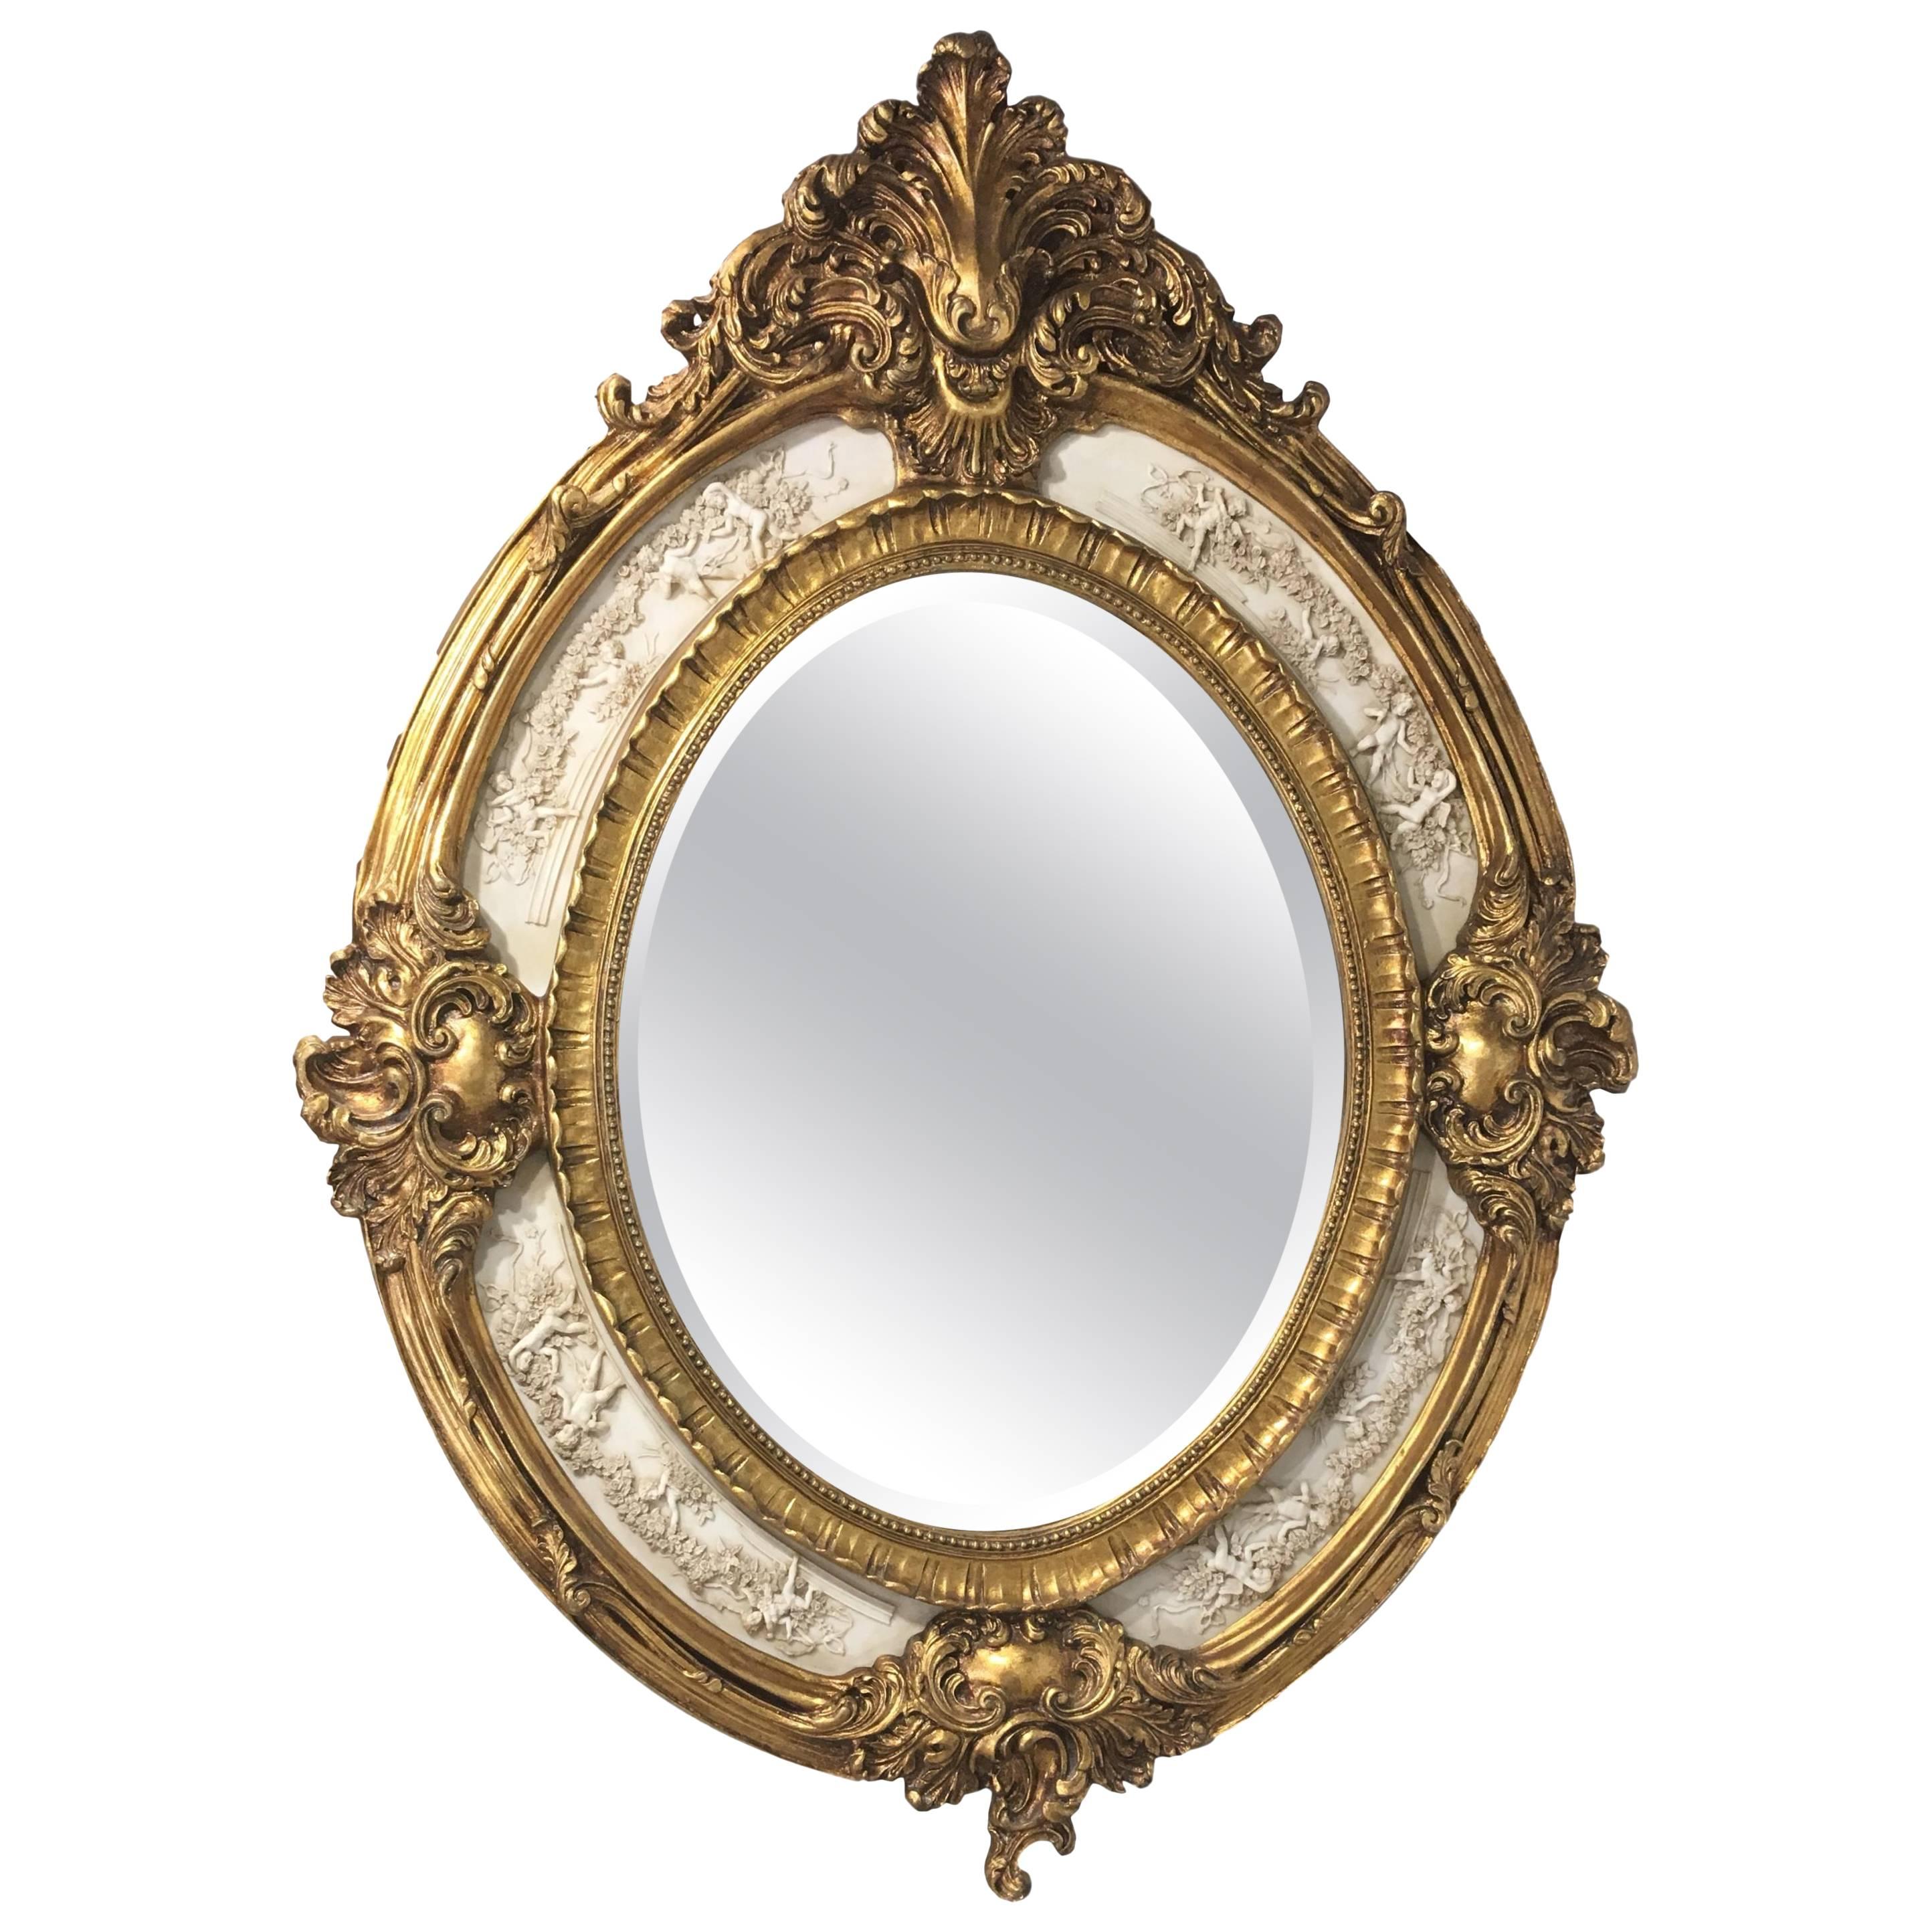 19th French Empire Period Gilt Wood Oval Mirror with Carved Marble